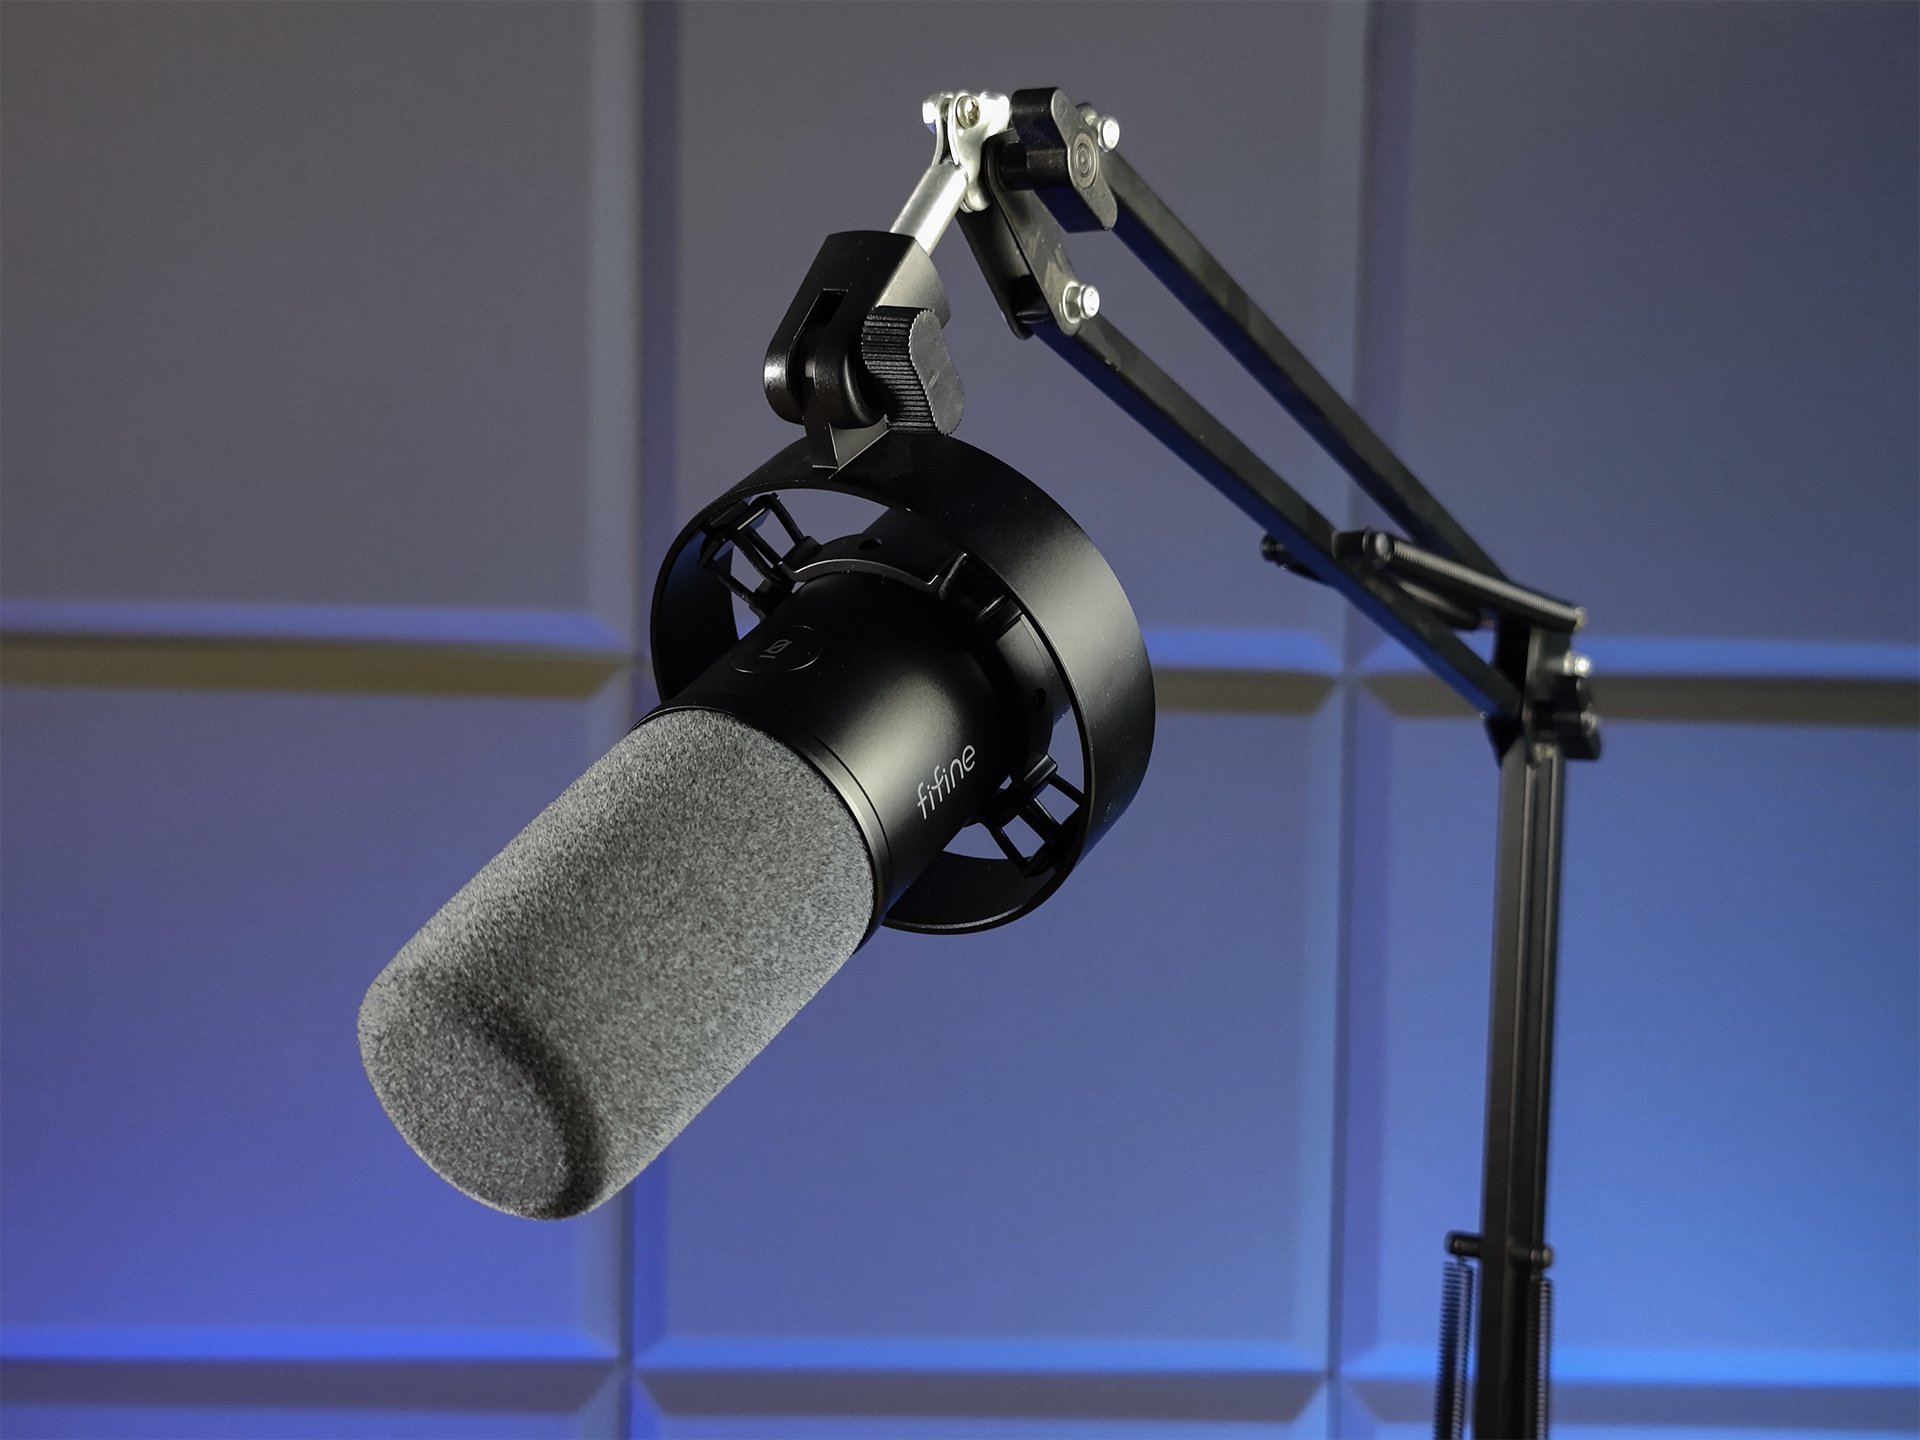 FIFINE AM8 XLR/USB Gaming Microphone Test Review 